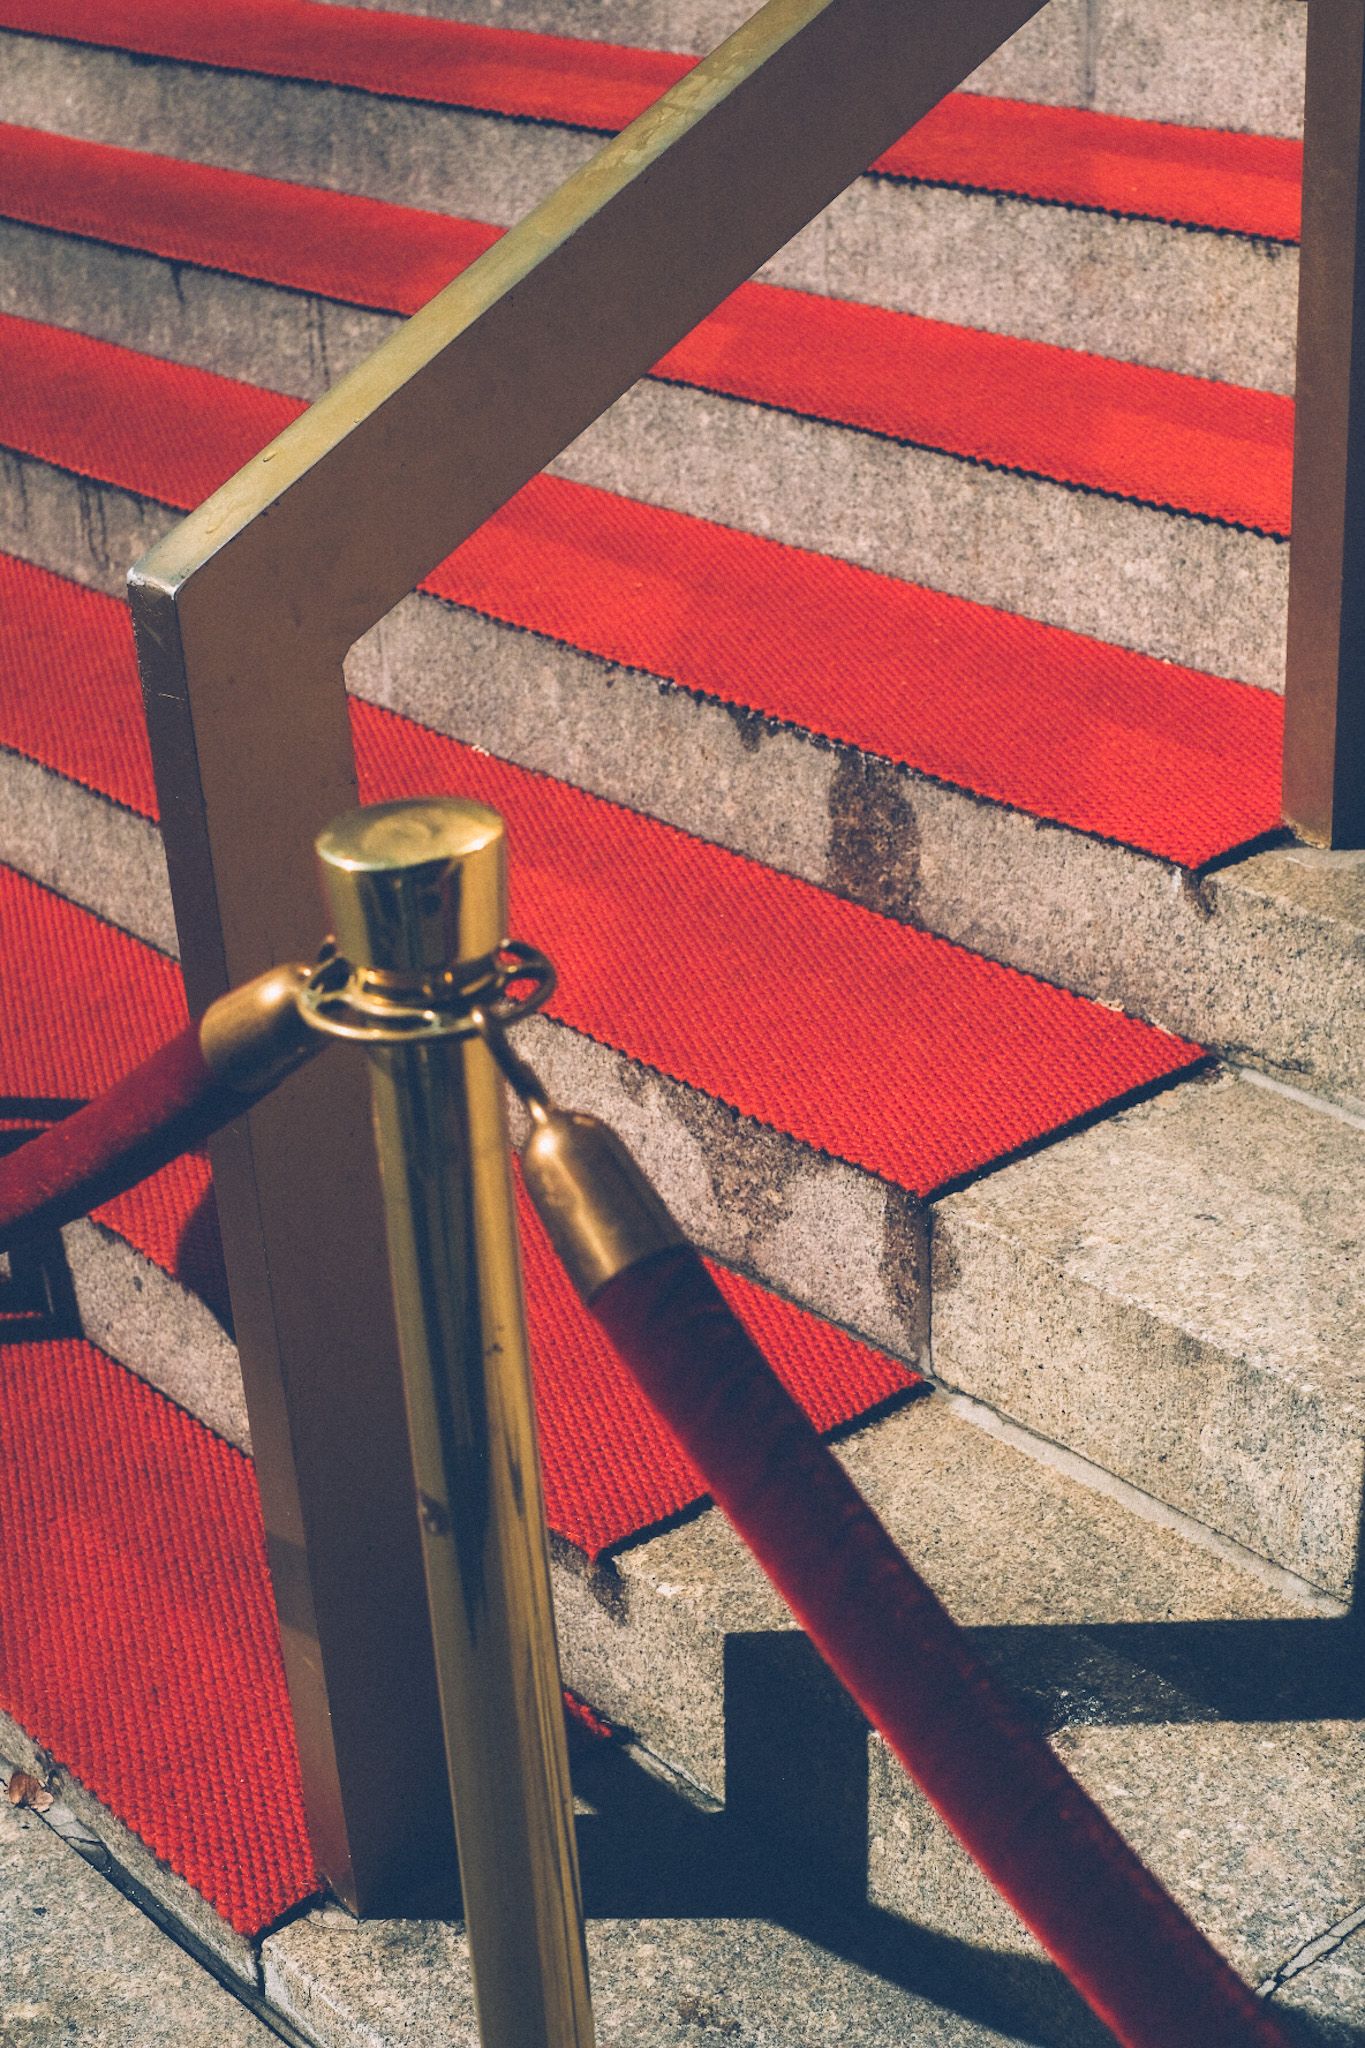 A velvet rope hung from a golden stand lines red carpeted stairs outside of a building.